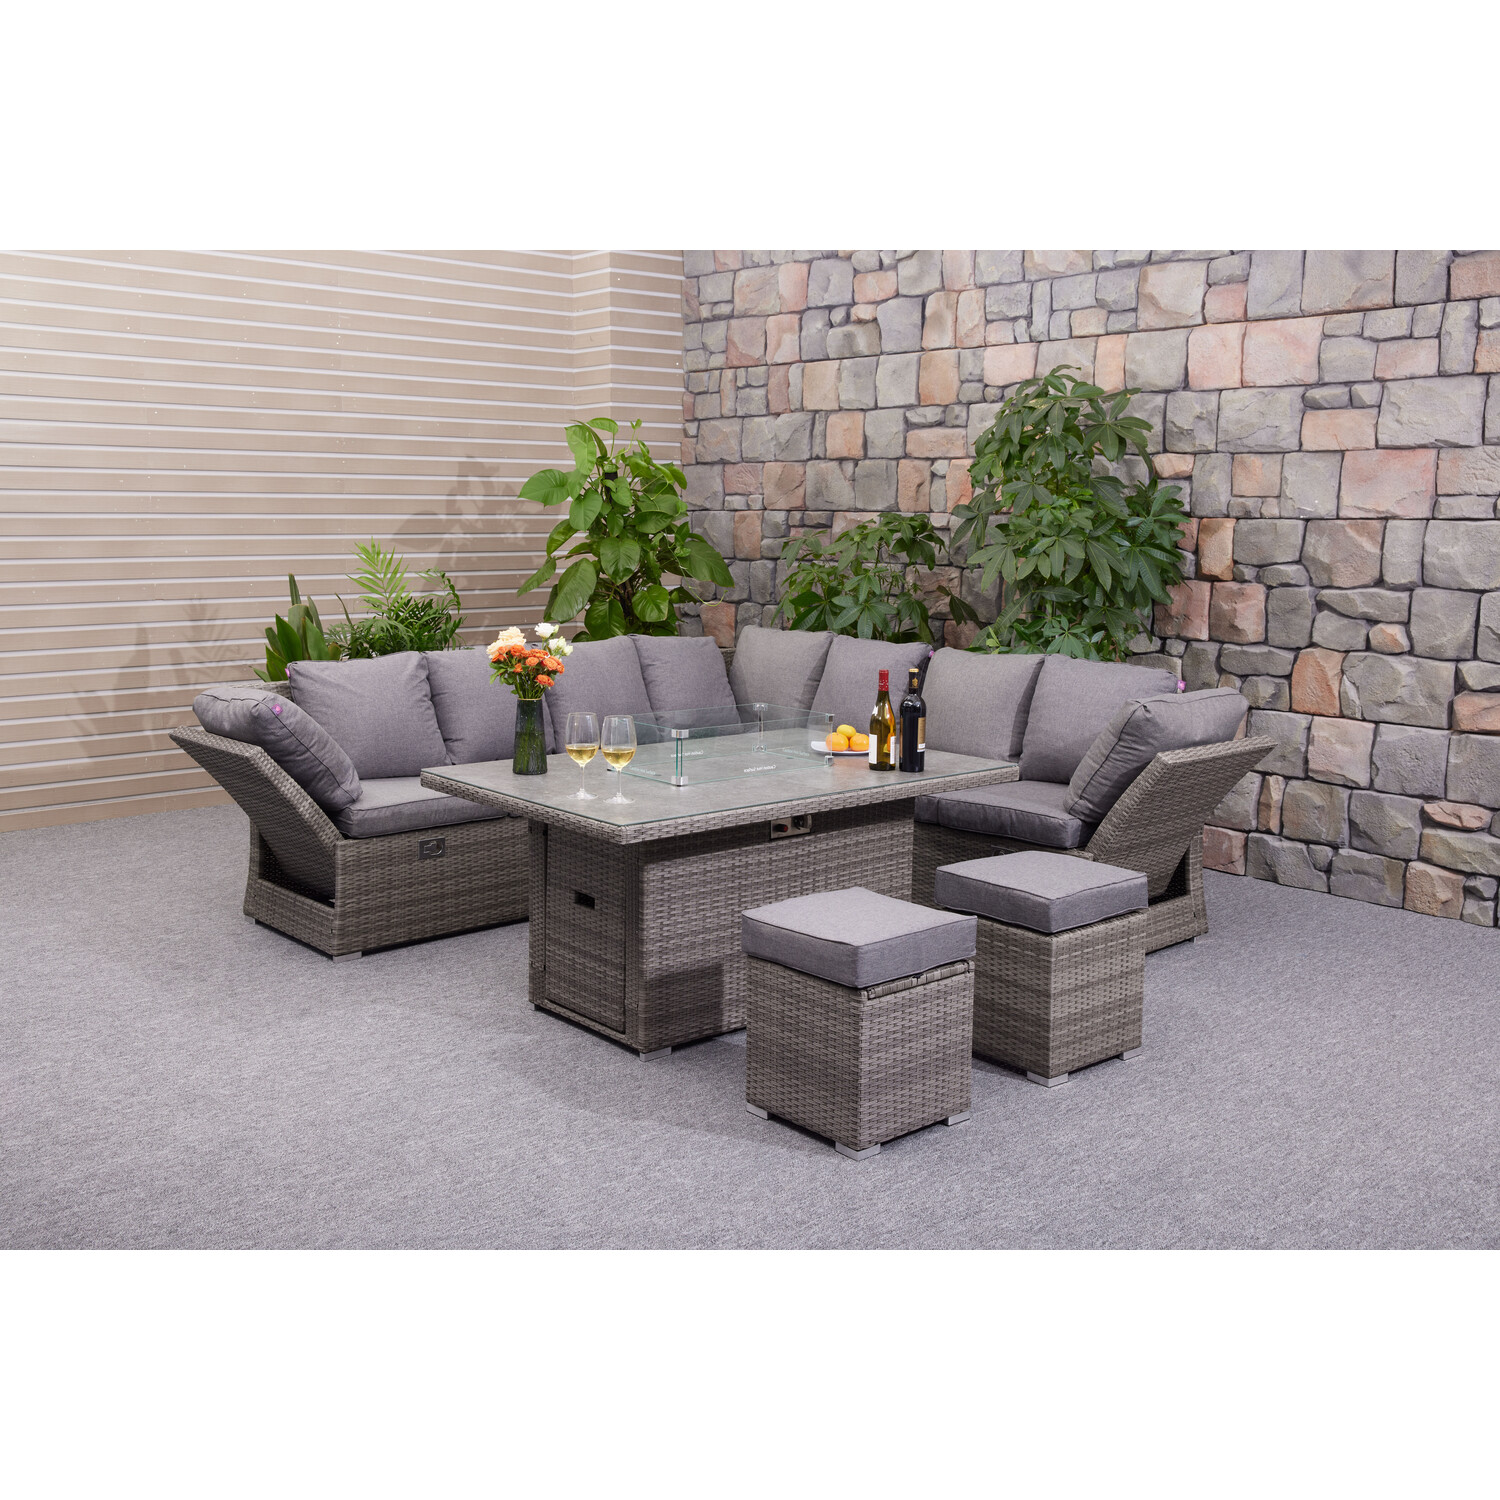 Malay Deluxe Malay New Hampshire 6 Seater Grey Wicker Fire Pit Garden Lounge Set Image 12